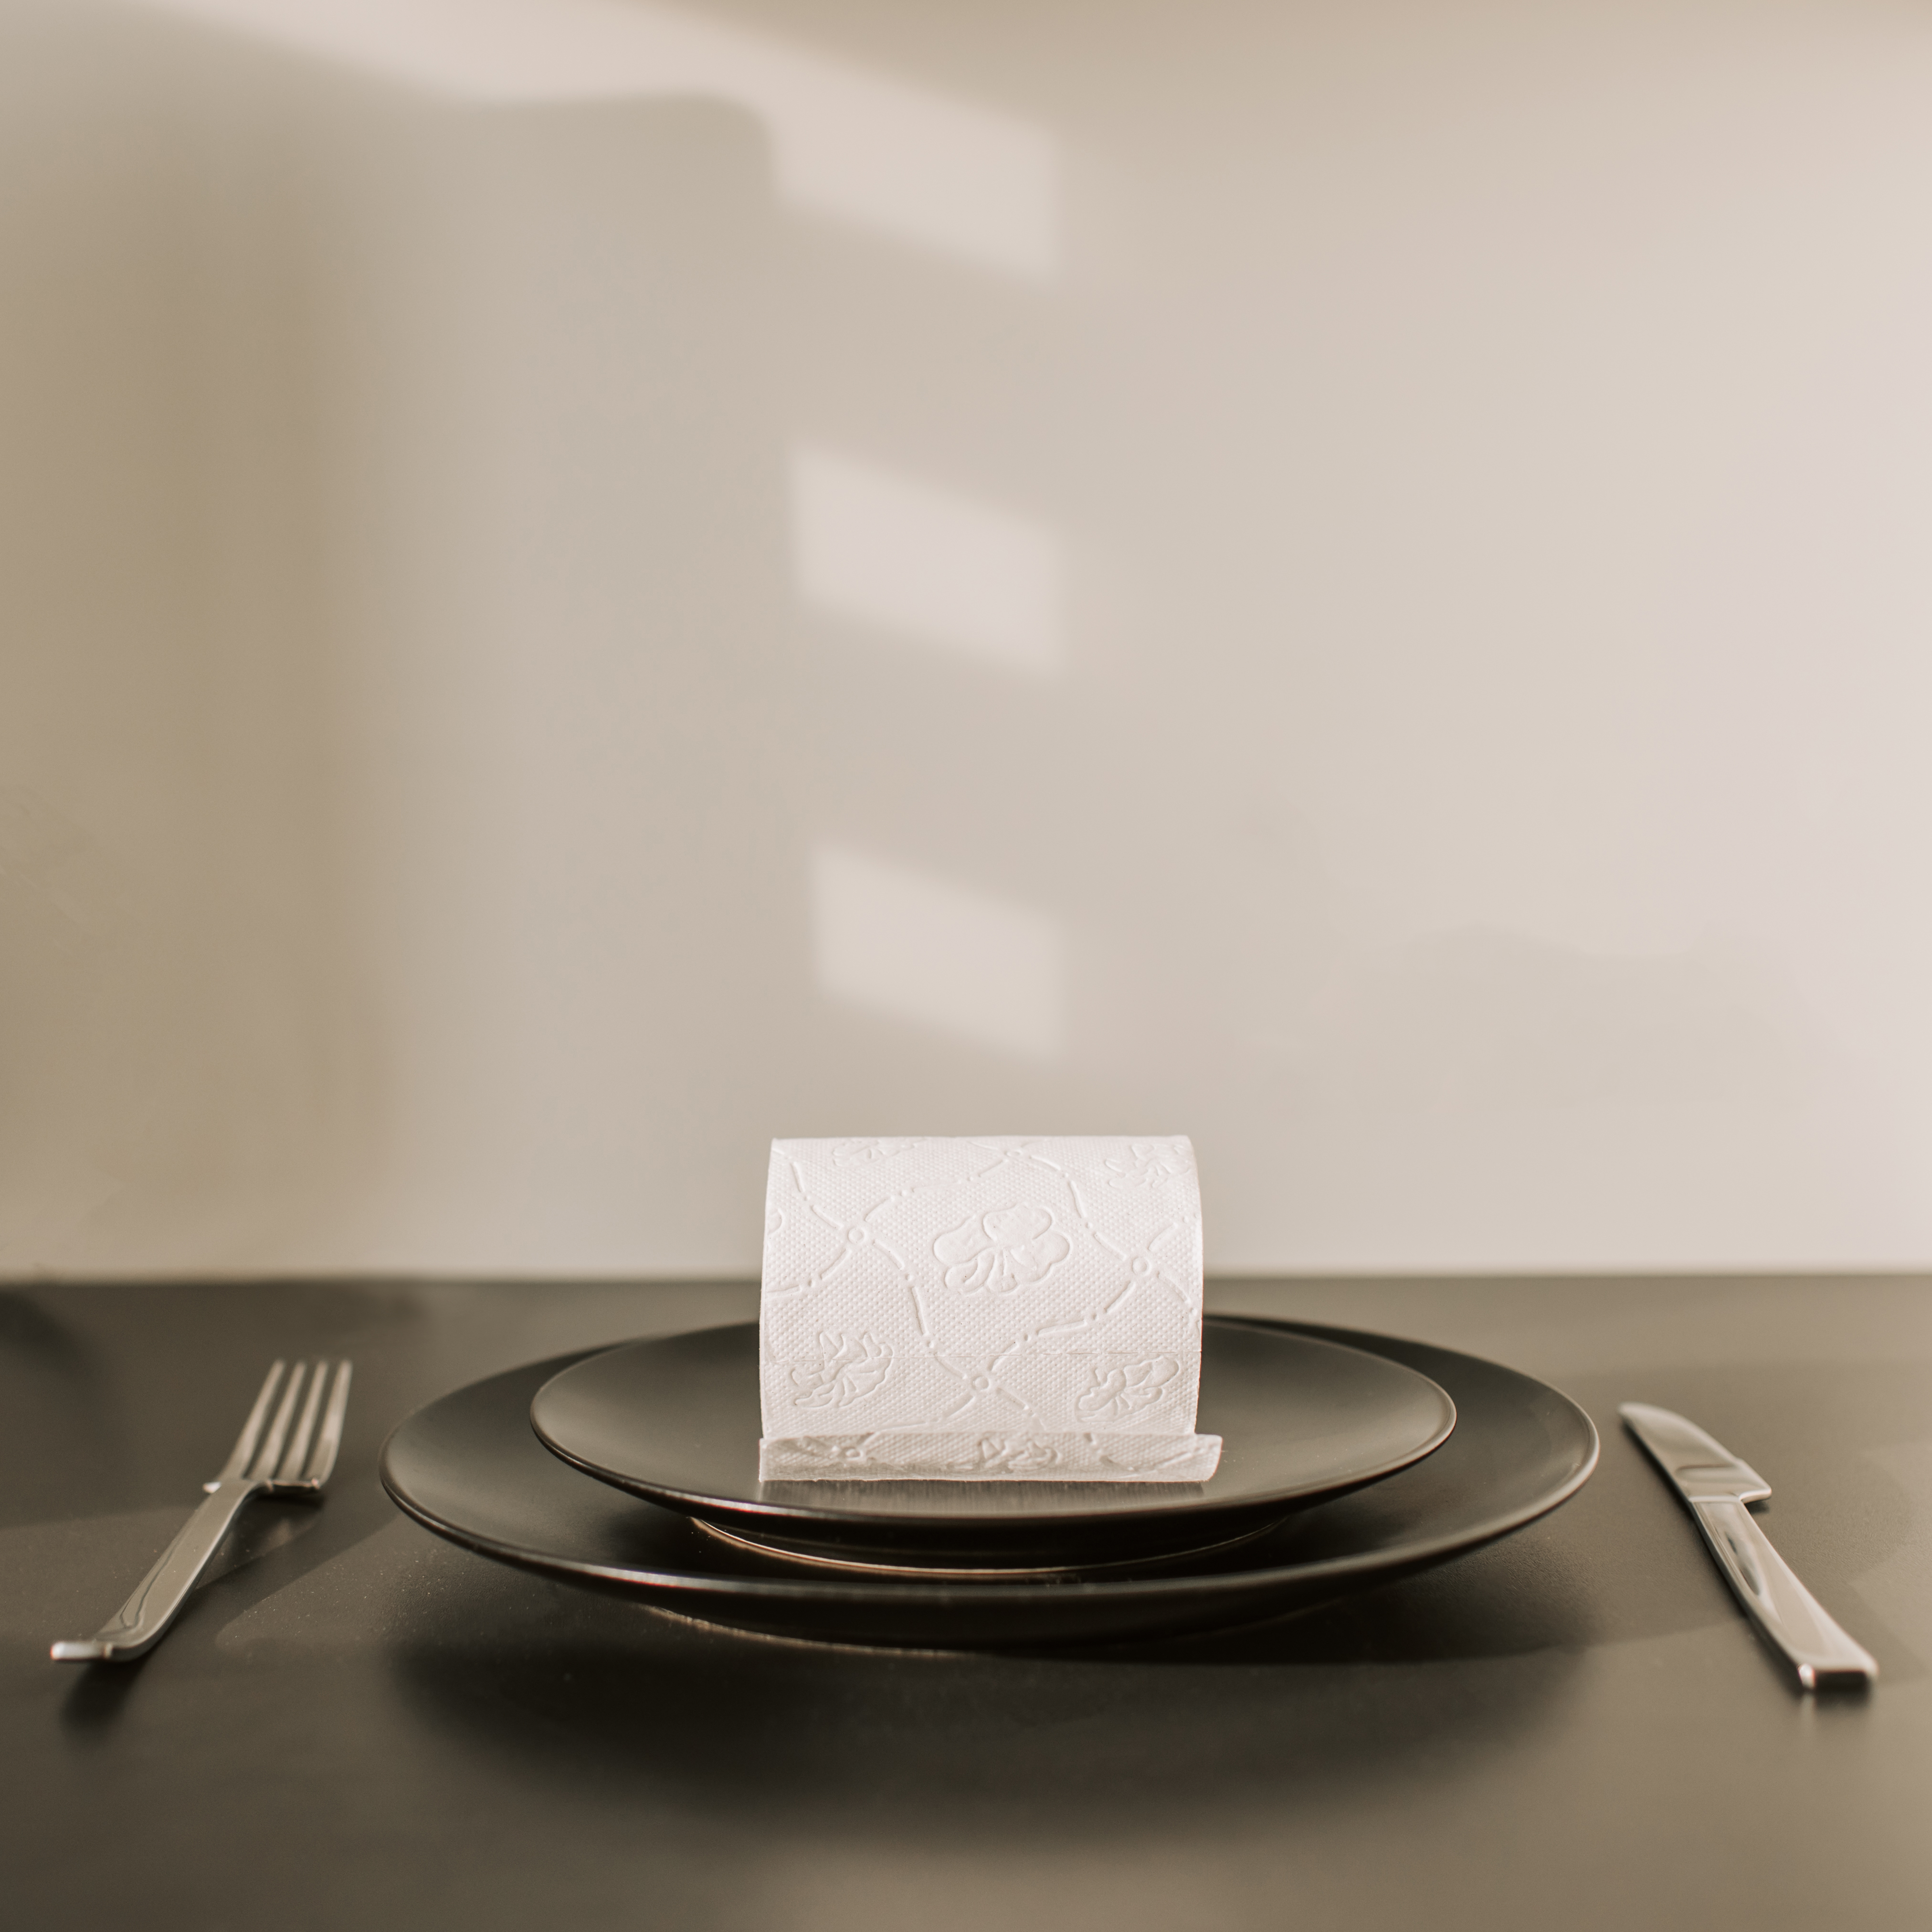 toilet-paper-roll-on-dish-with-fork-and-knife-3958213